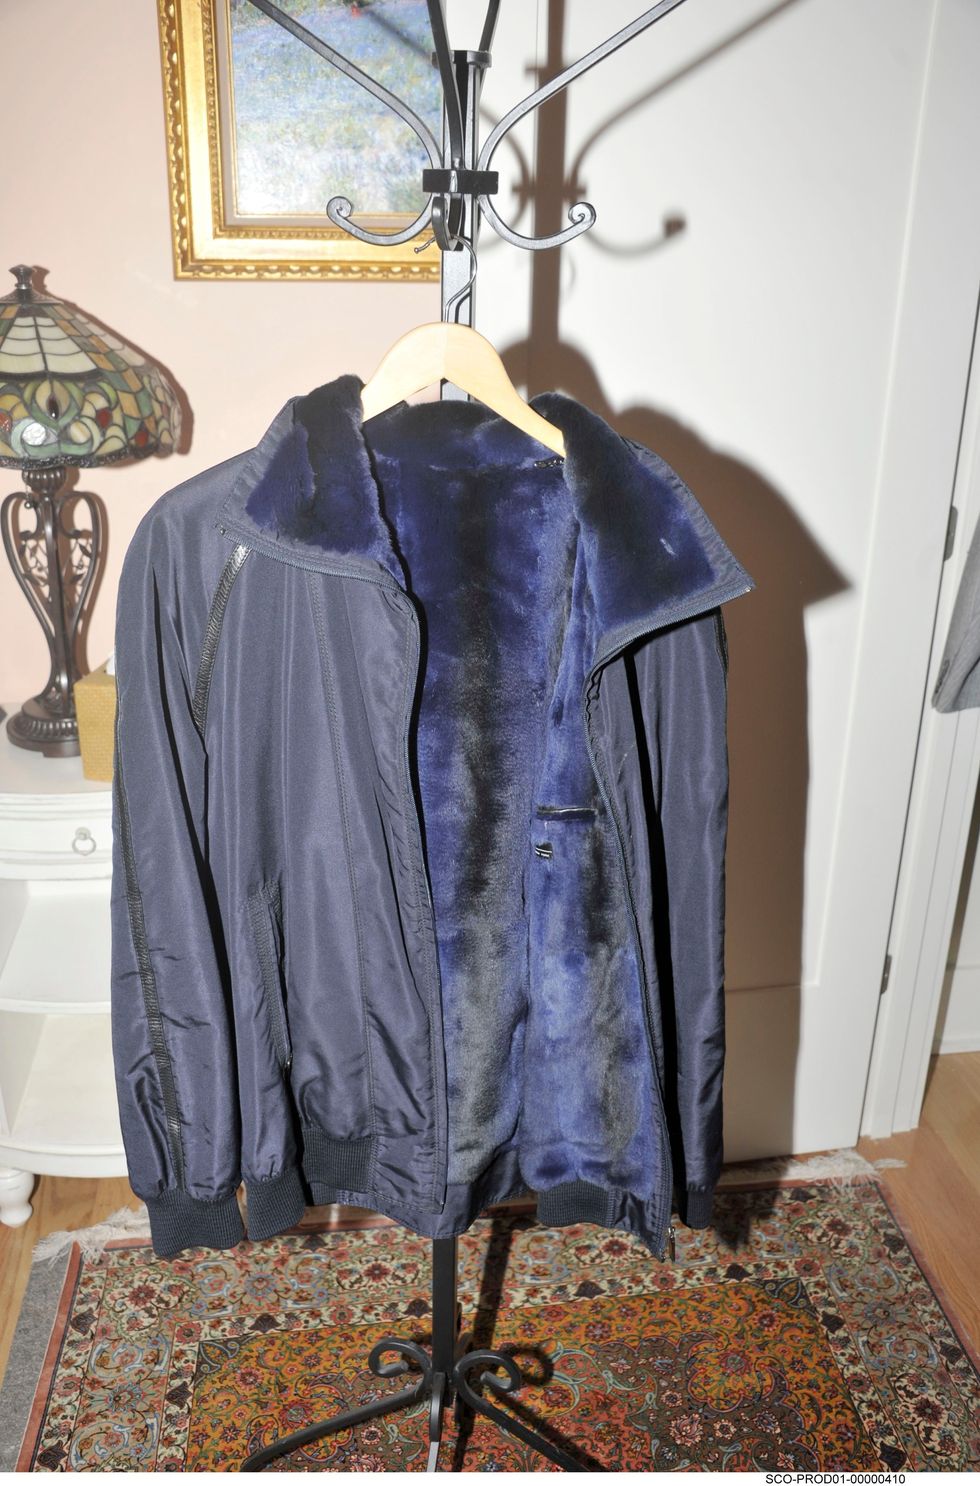 Clothes hanger, Clothing, Outerwear, Jacket, Room, Leather jacket, Sleeve, Boutique, Coat, 